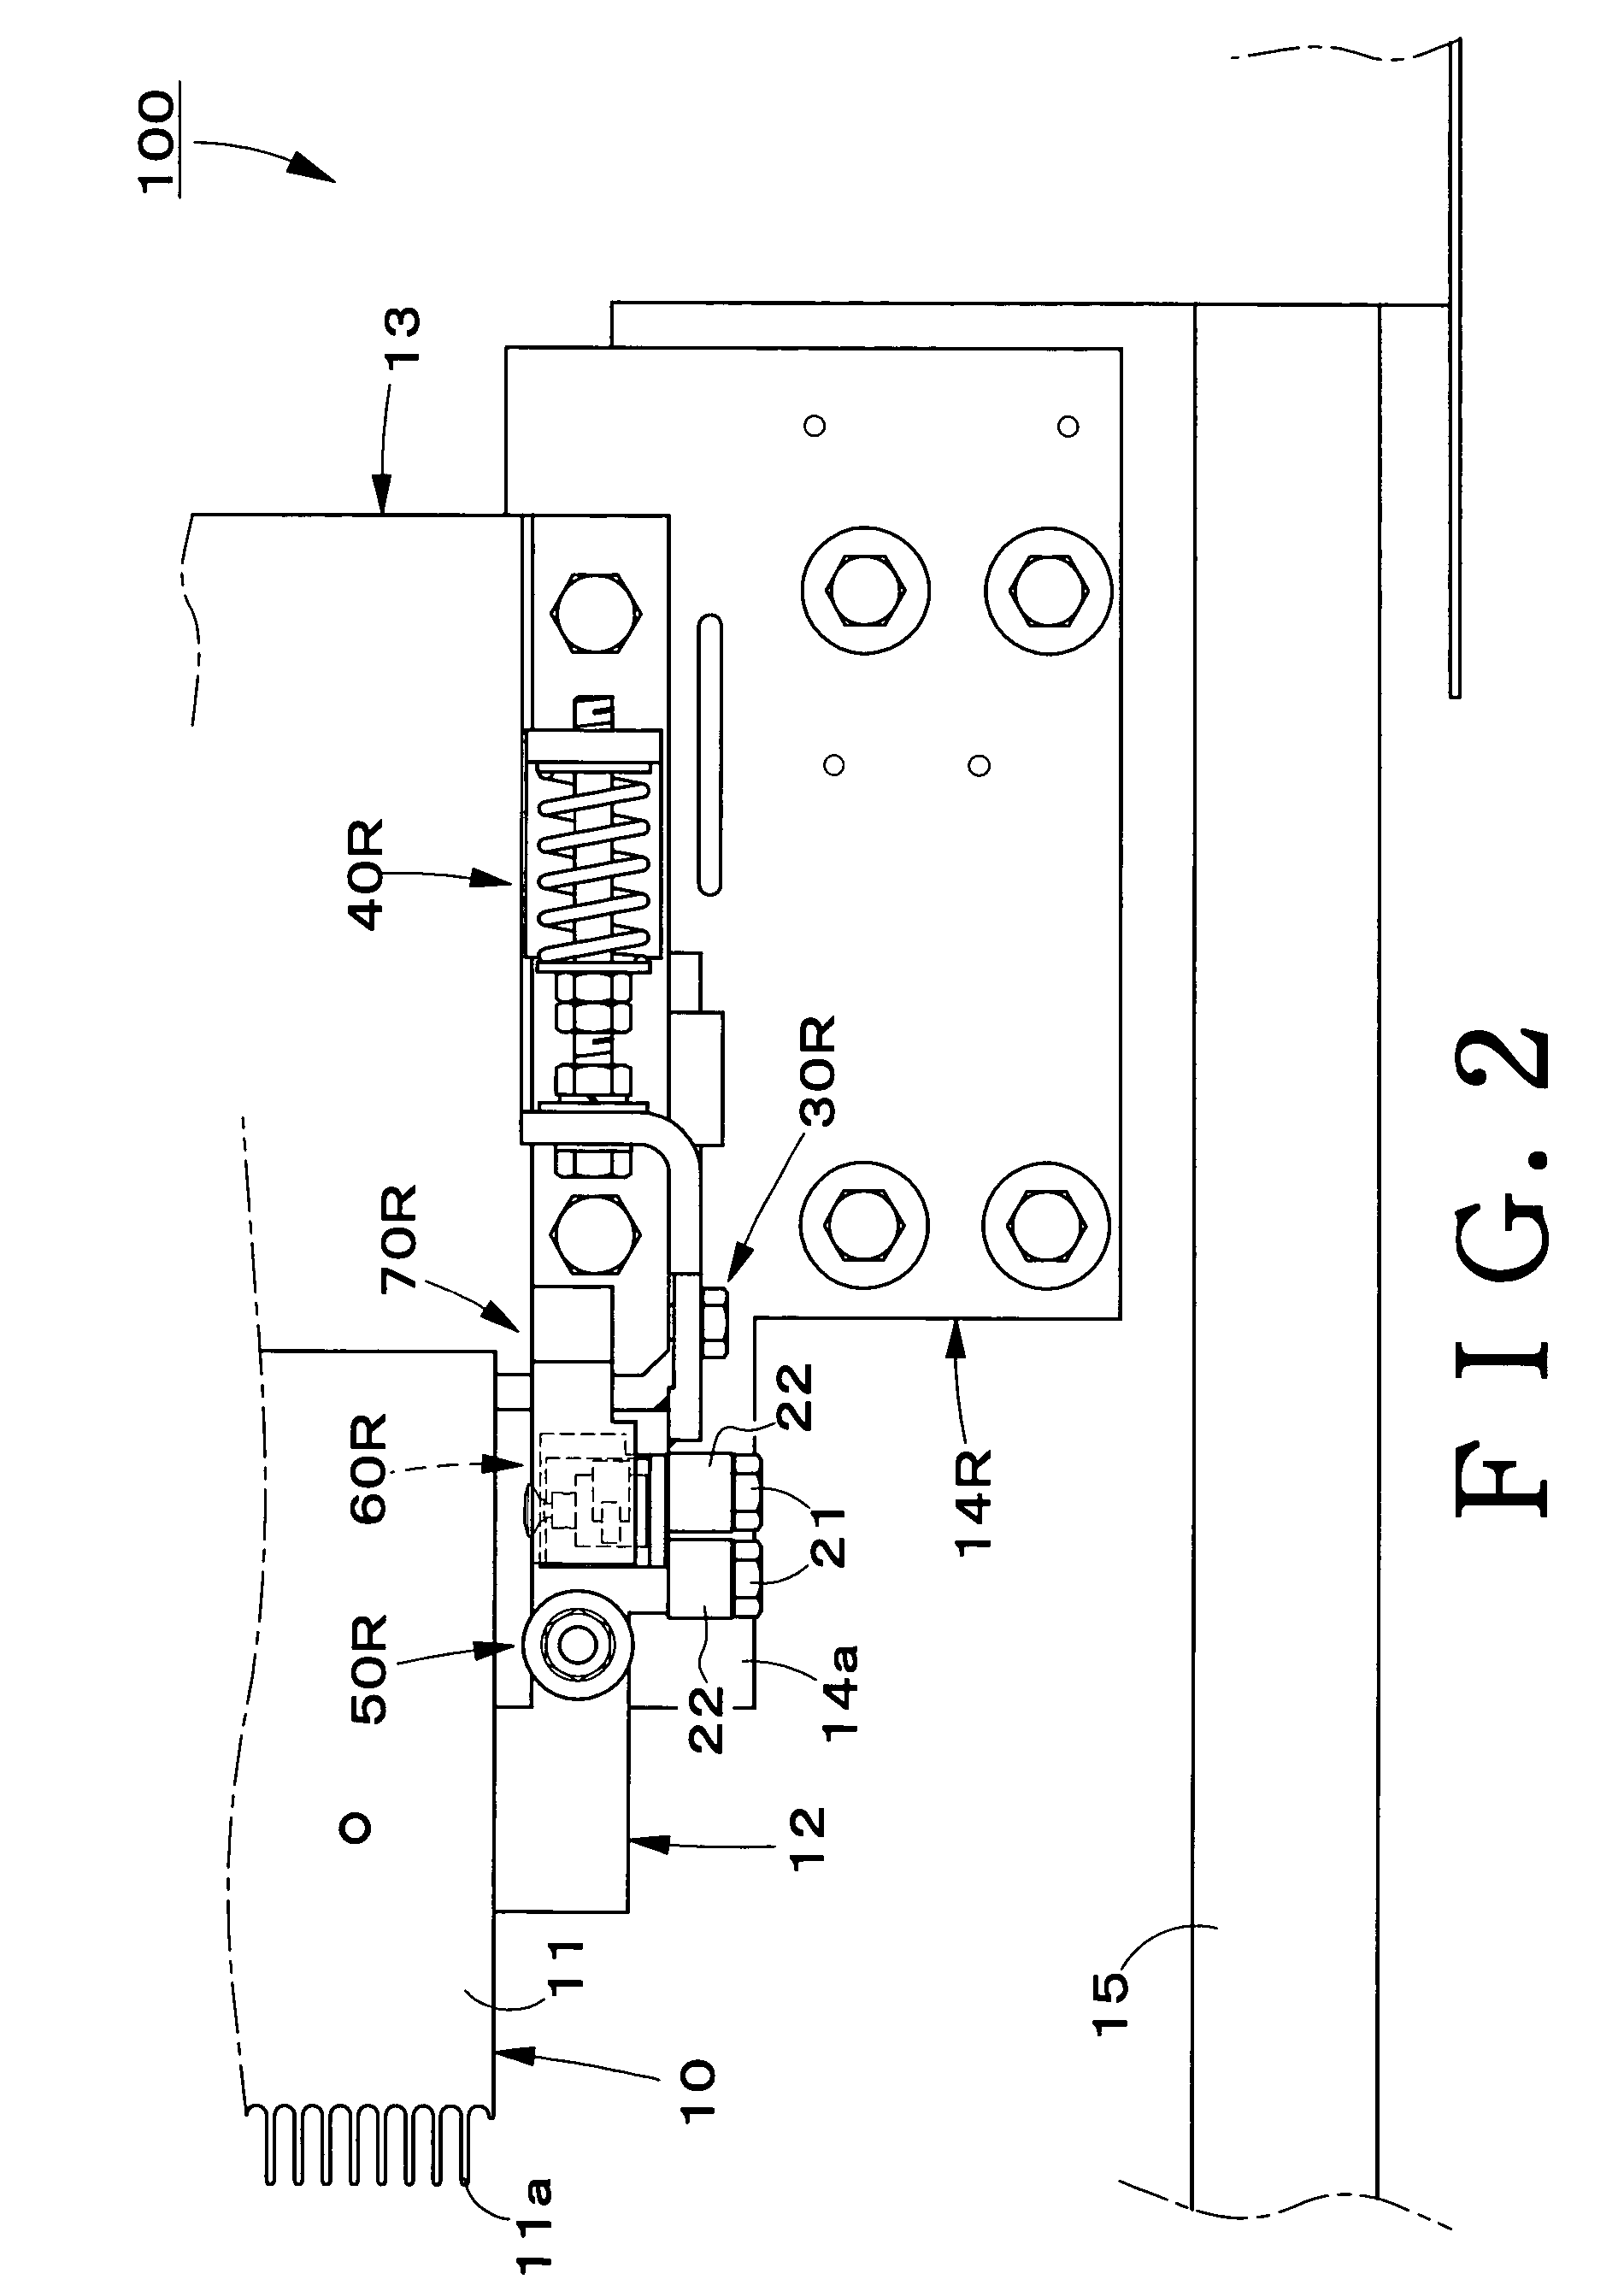 Safety device for a passenger conveyor